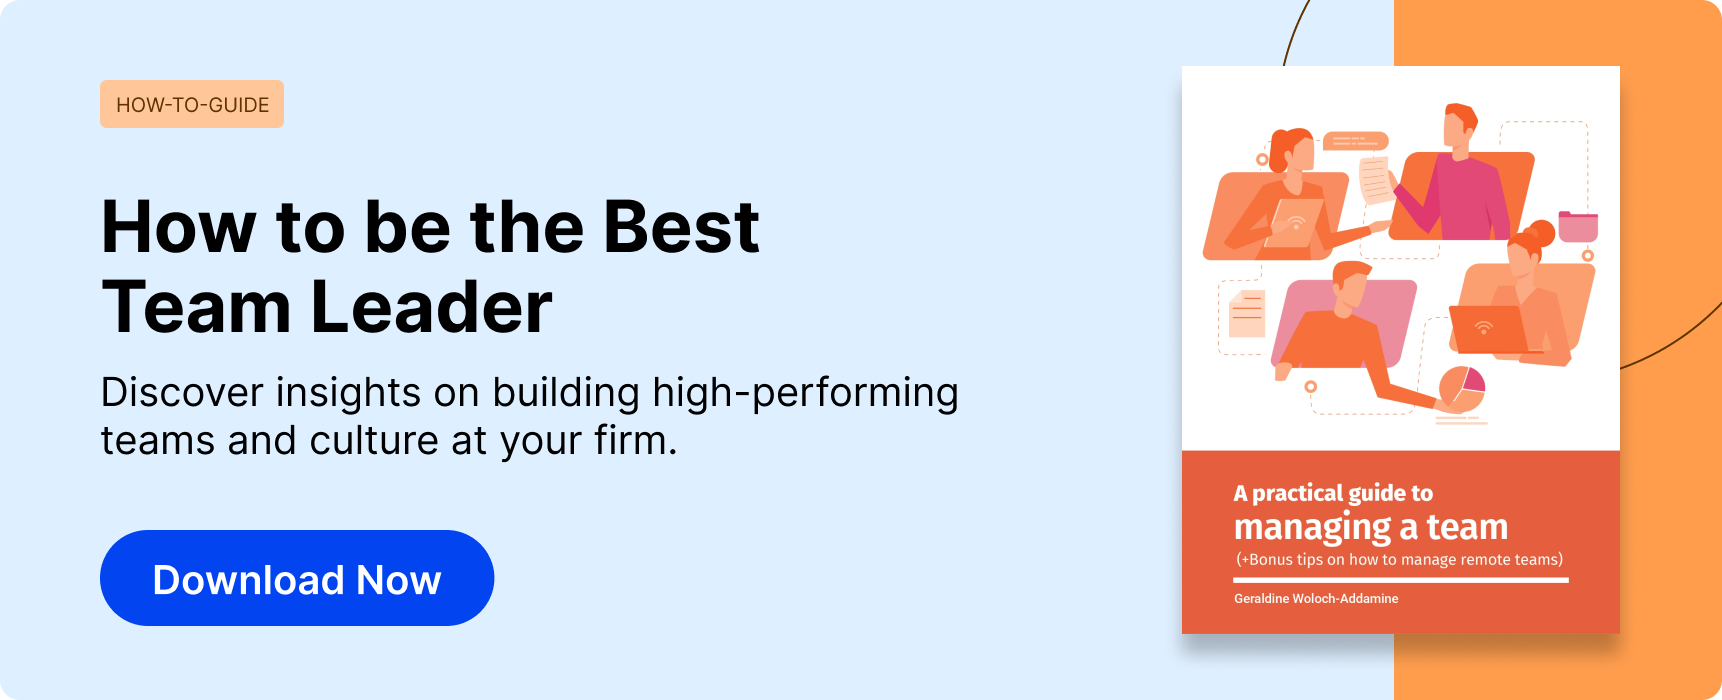 download the guide to be the best team leader